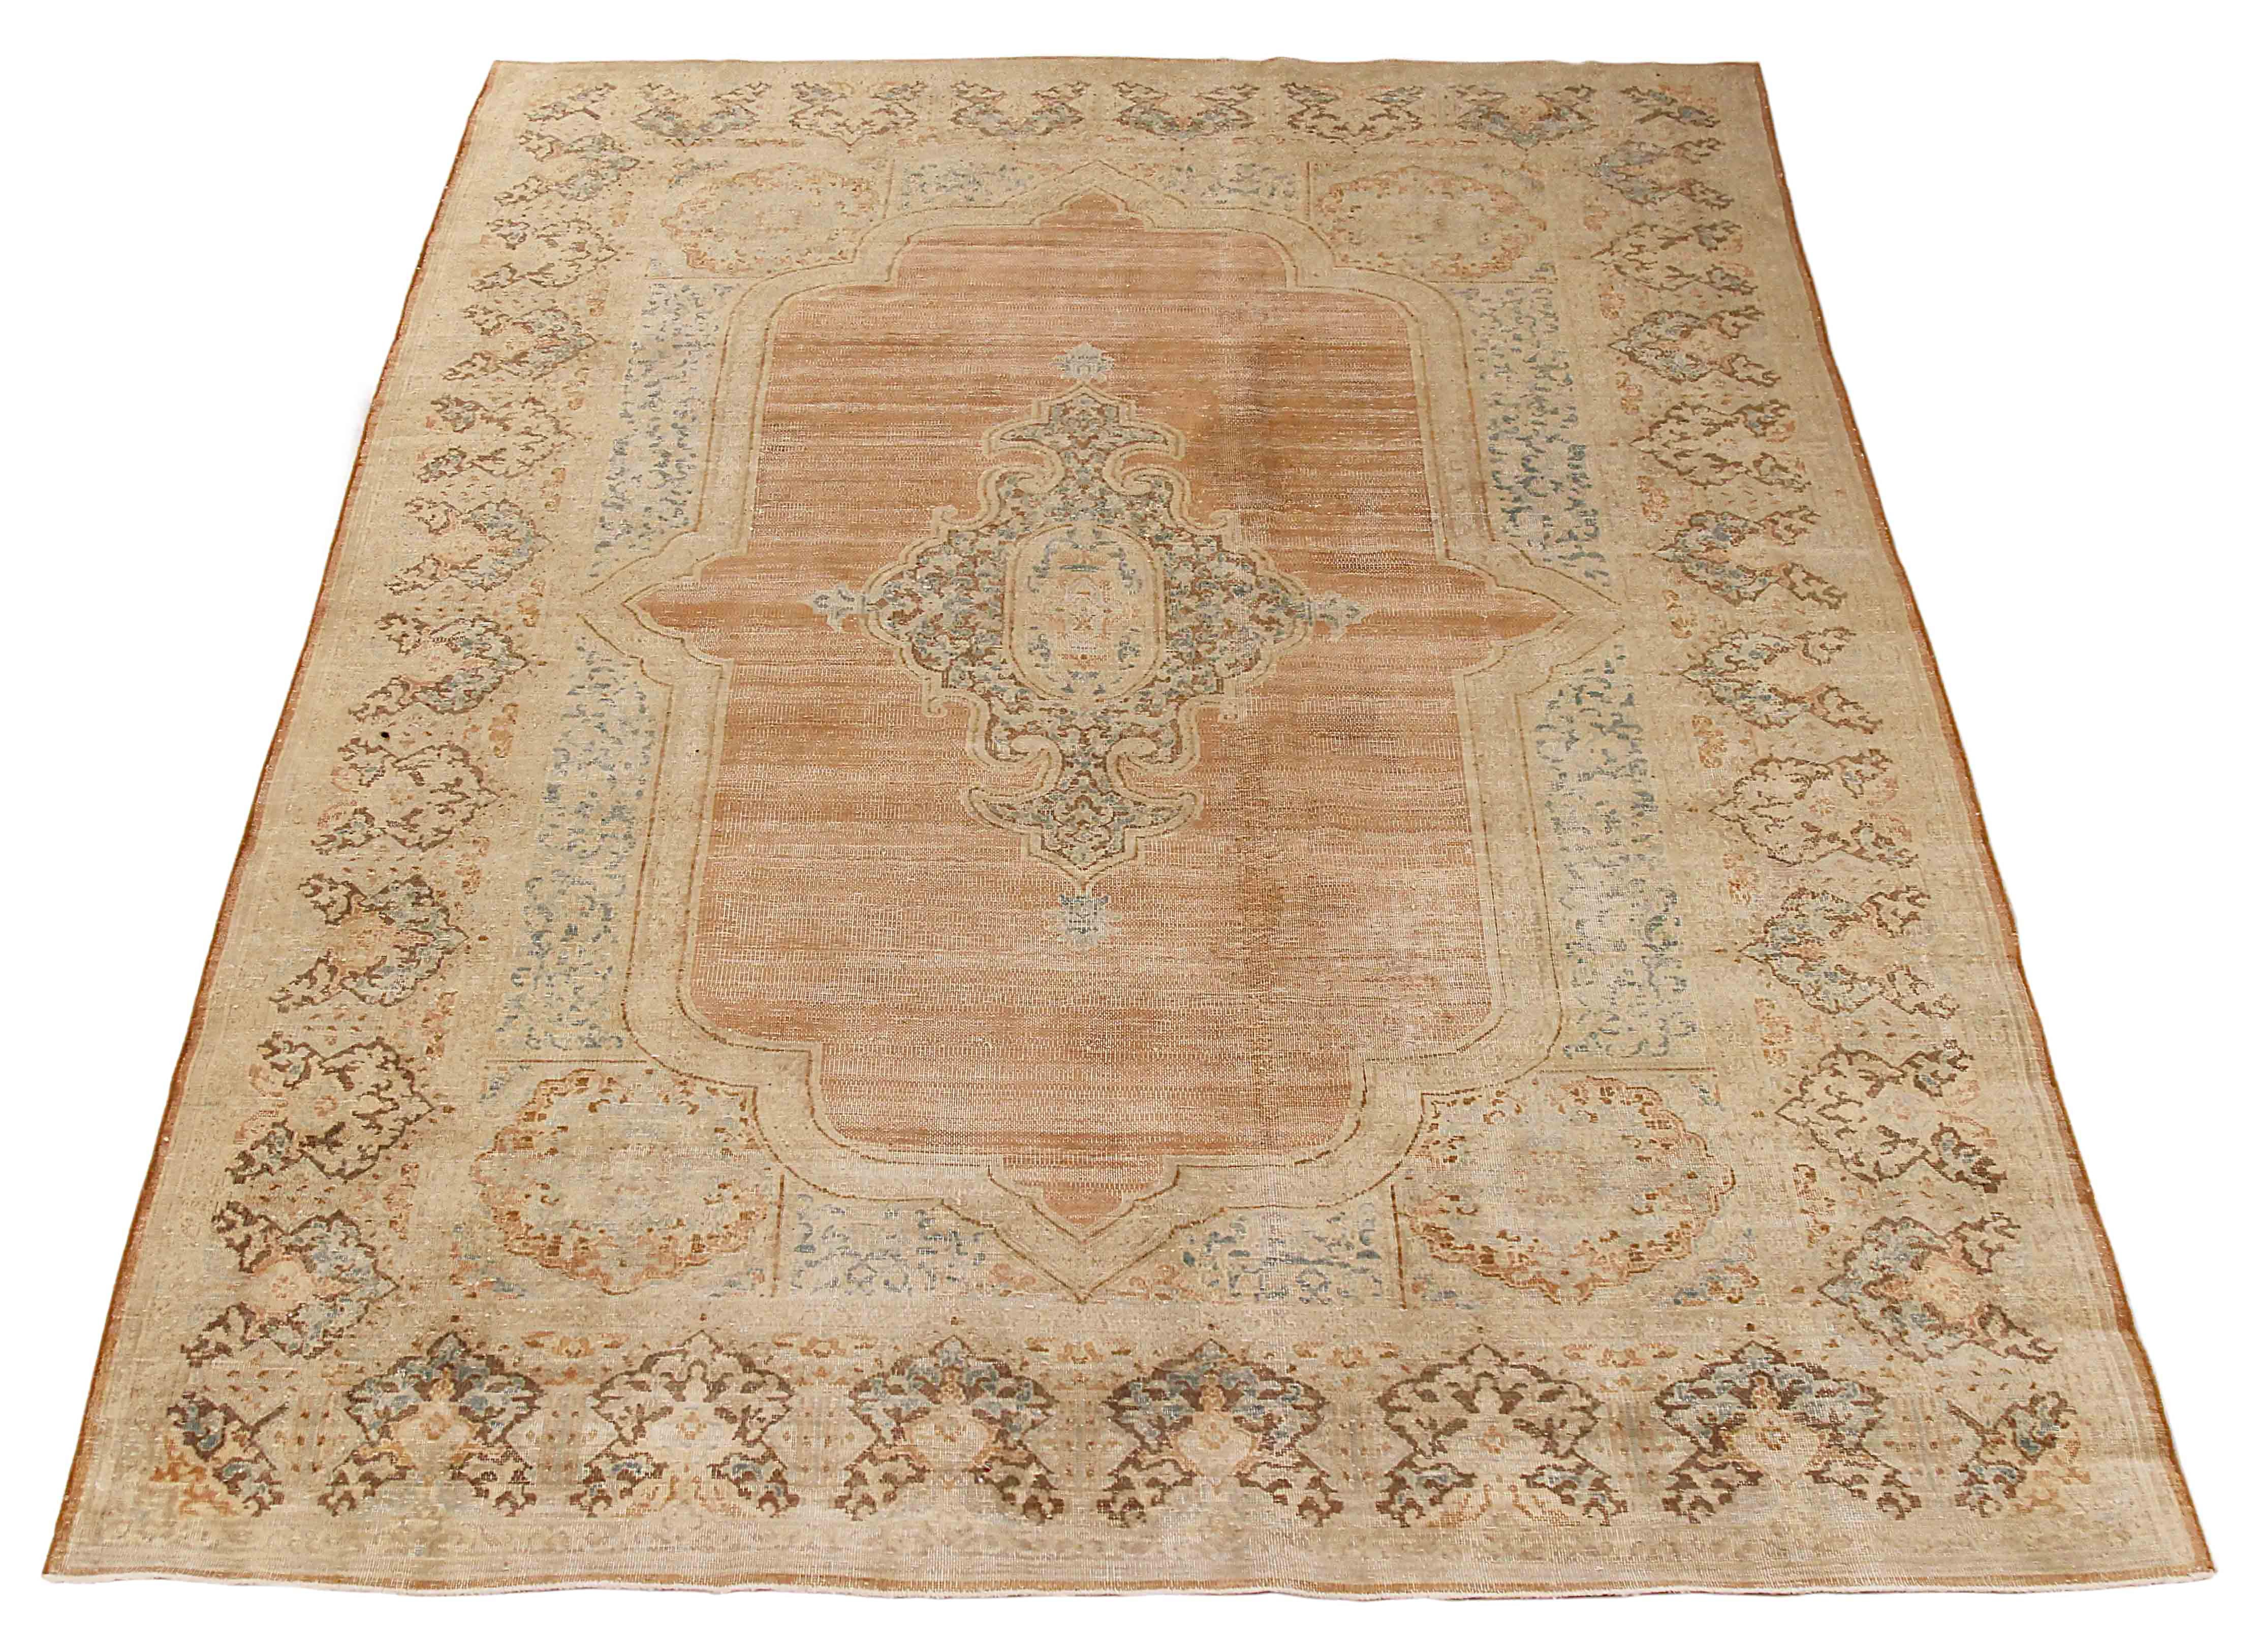 Antique Persian area rug handwoven from the finest sheep’s wool. It’s colored with all-natural vegetable dyes that are safe for humans and pets. It’s a traditional Overdye design handwoven by expert artisans. It’s a lovely area rug that can be